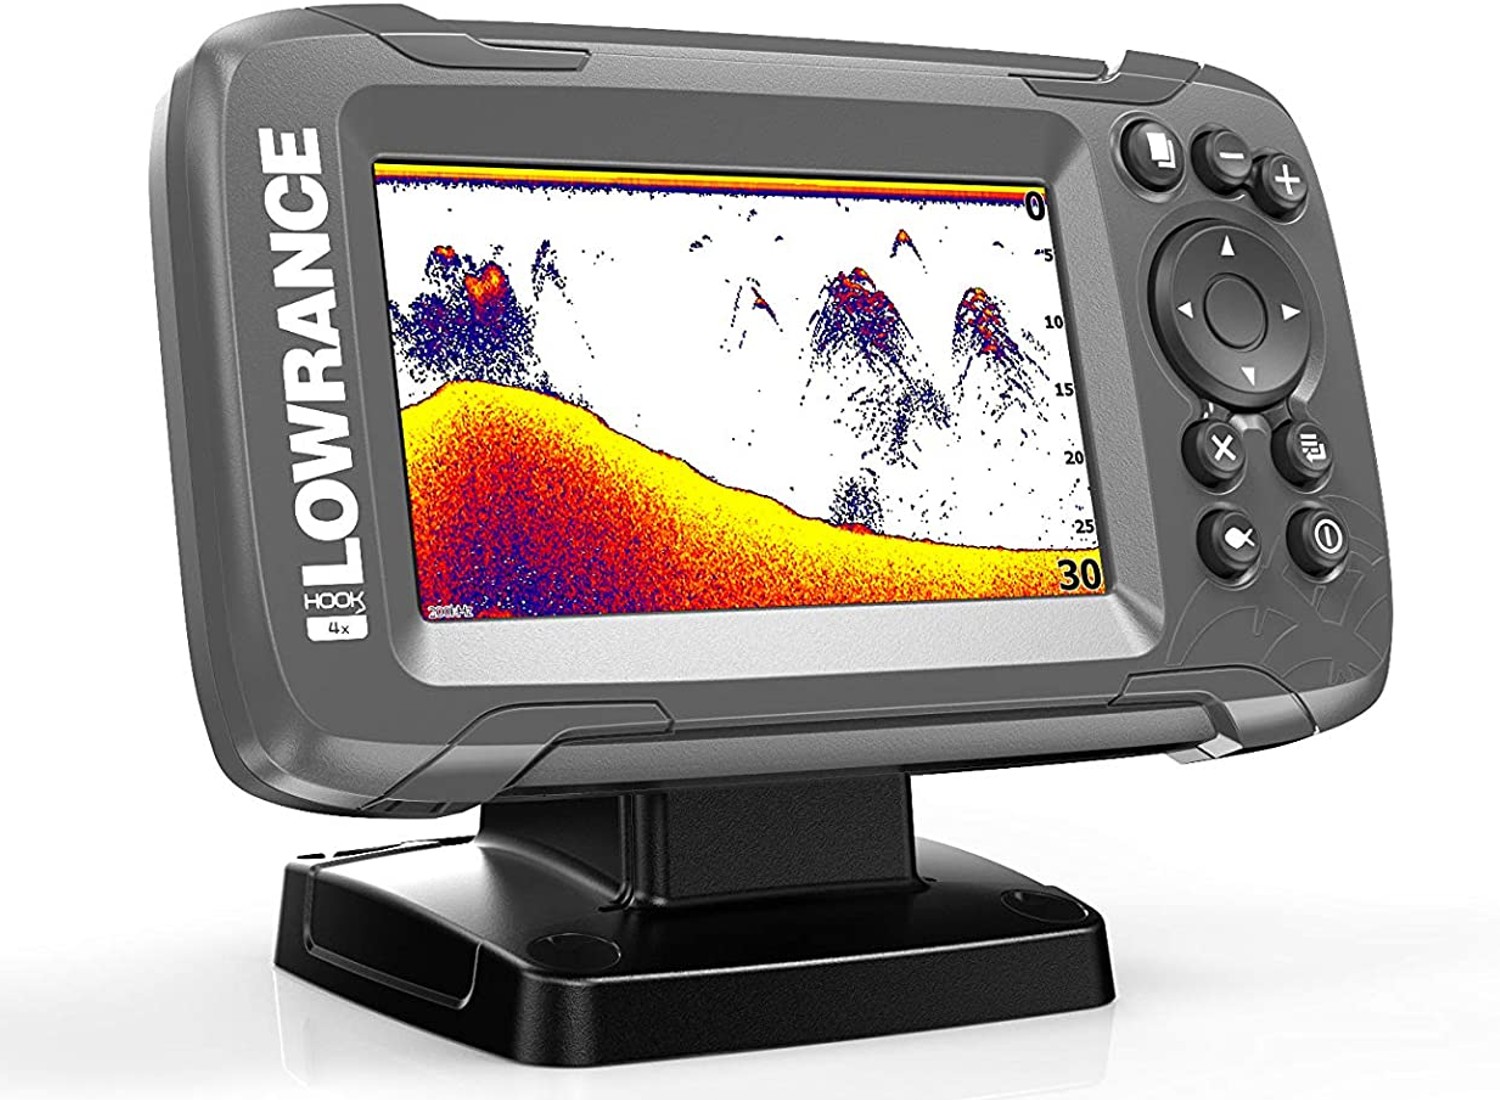 A black device with a stand and a display with white, orange, red, yellow, and purple coloring that creates the appearance of a slope all on a white background.